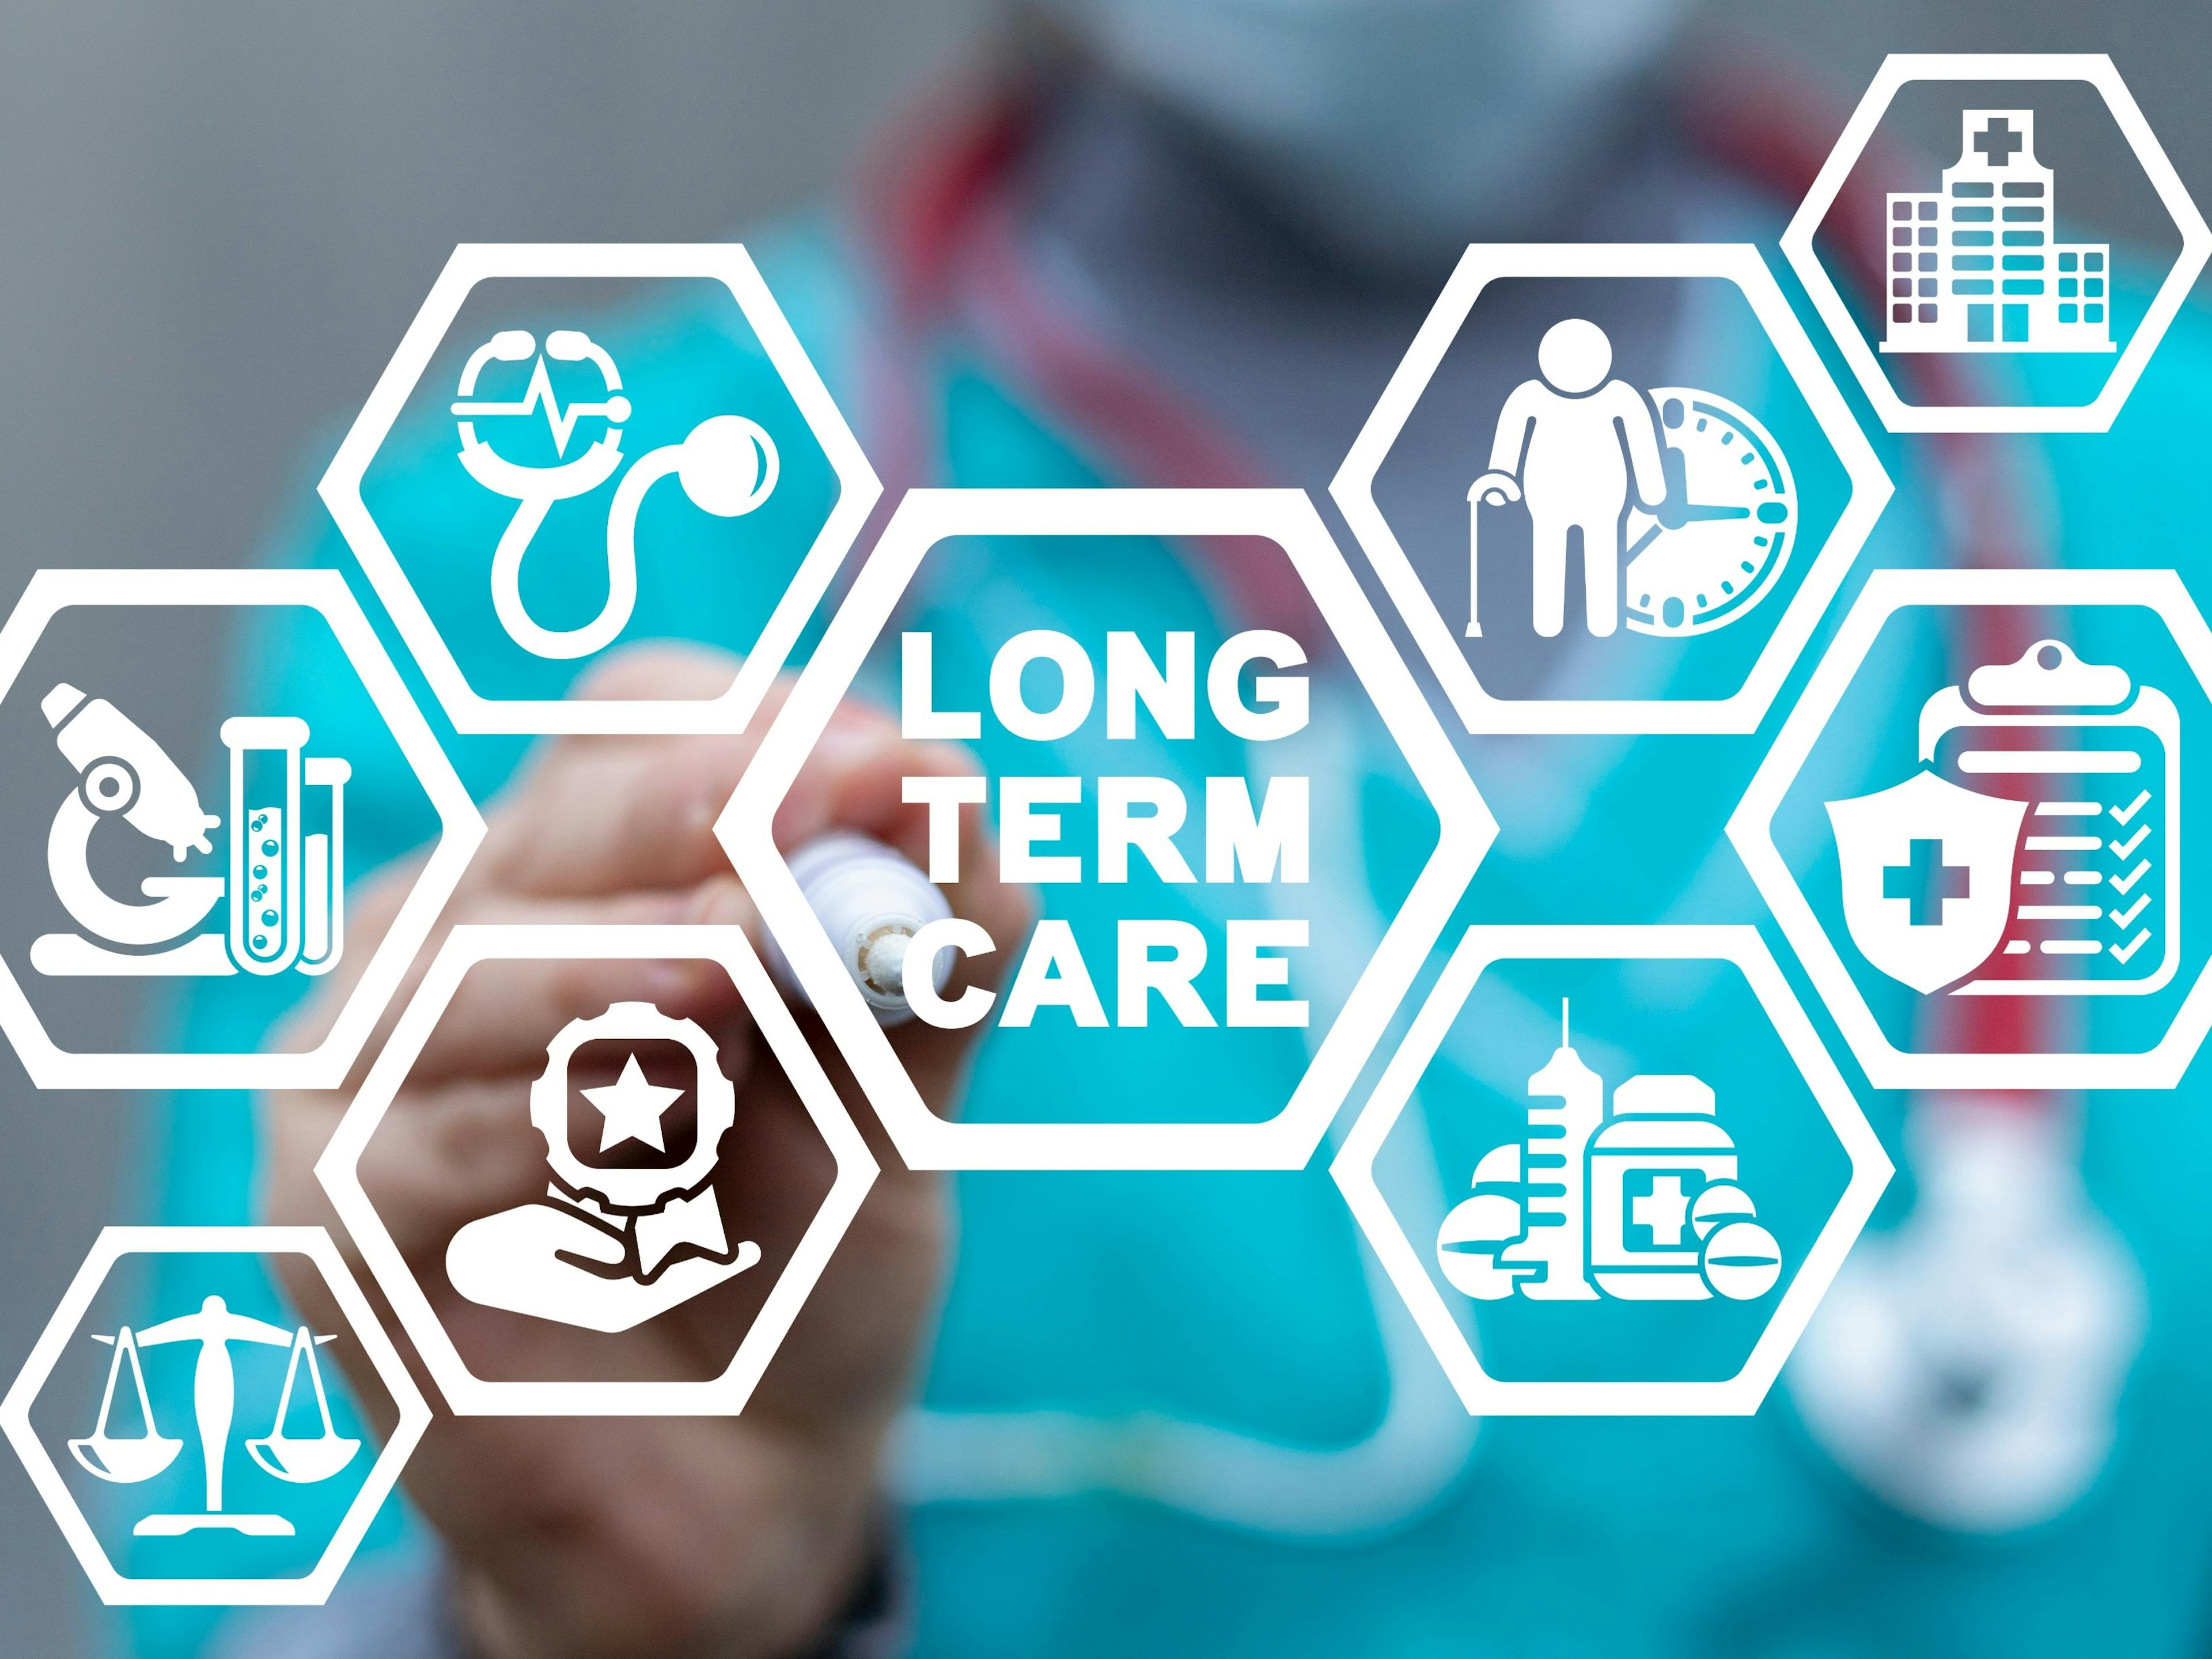 What Long-Term Care Does Medicare Cover